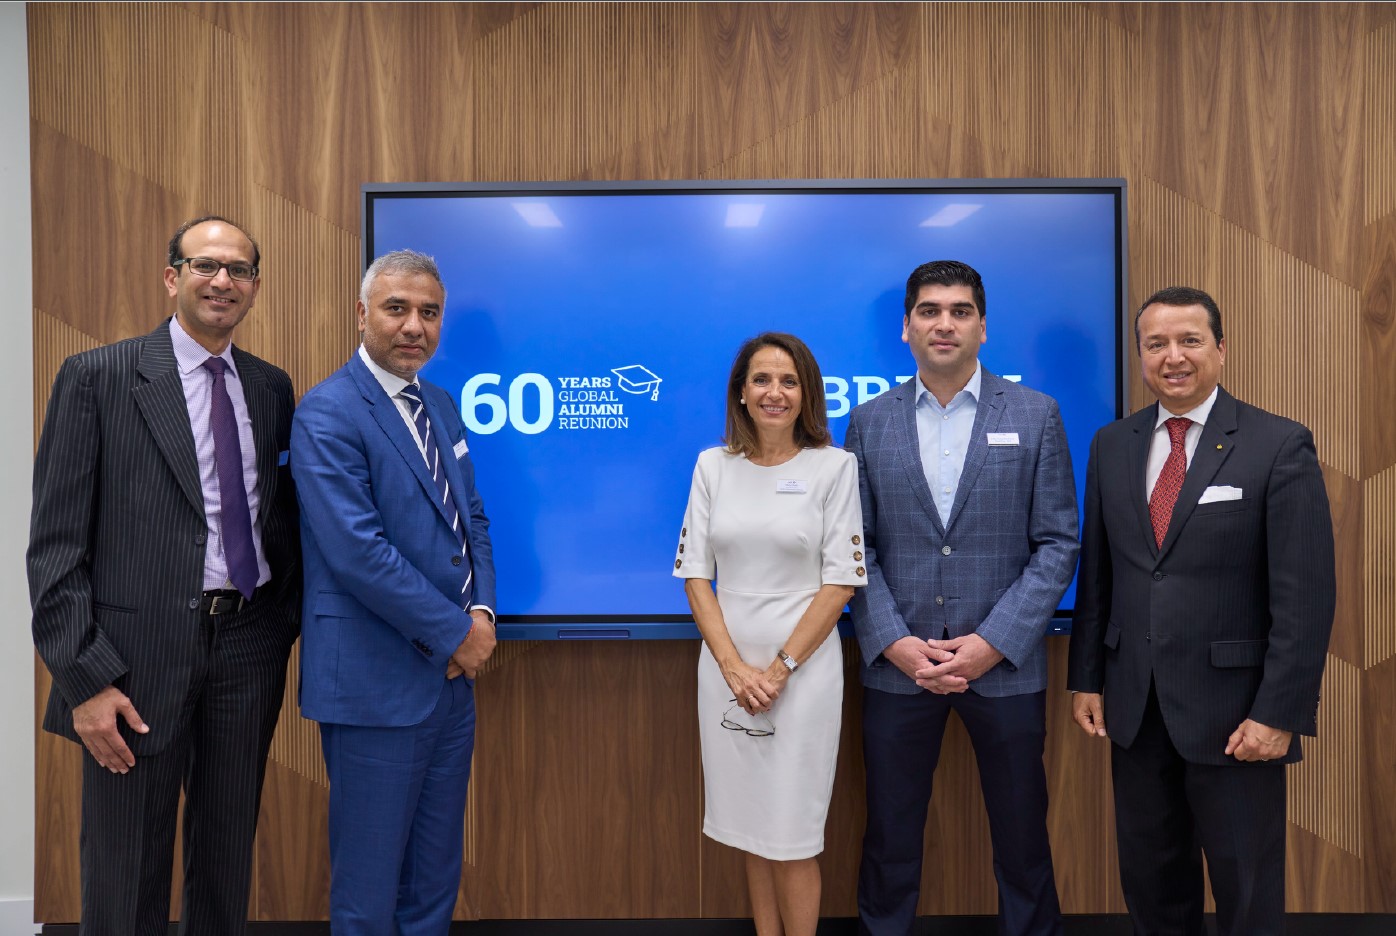 Ankur Mehta, Dr. Rana, Marta Muñiz, Otto Sonnenholzner and Alex Mejia in front of a tv with a blue screen